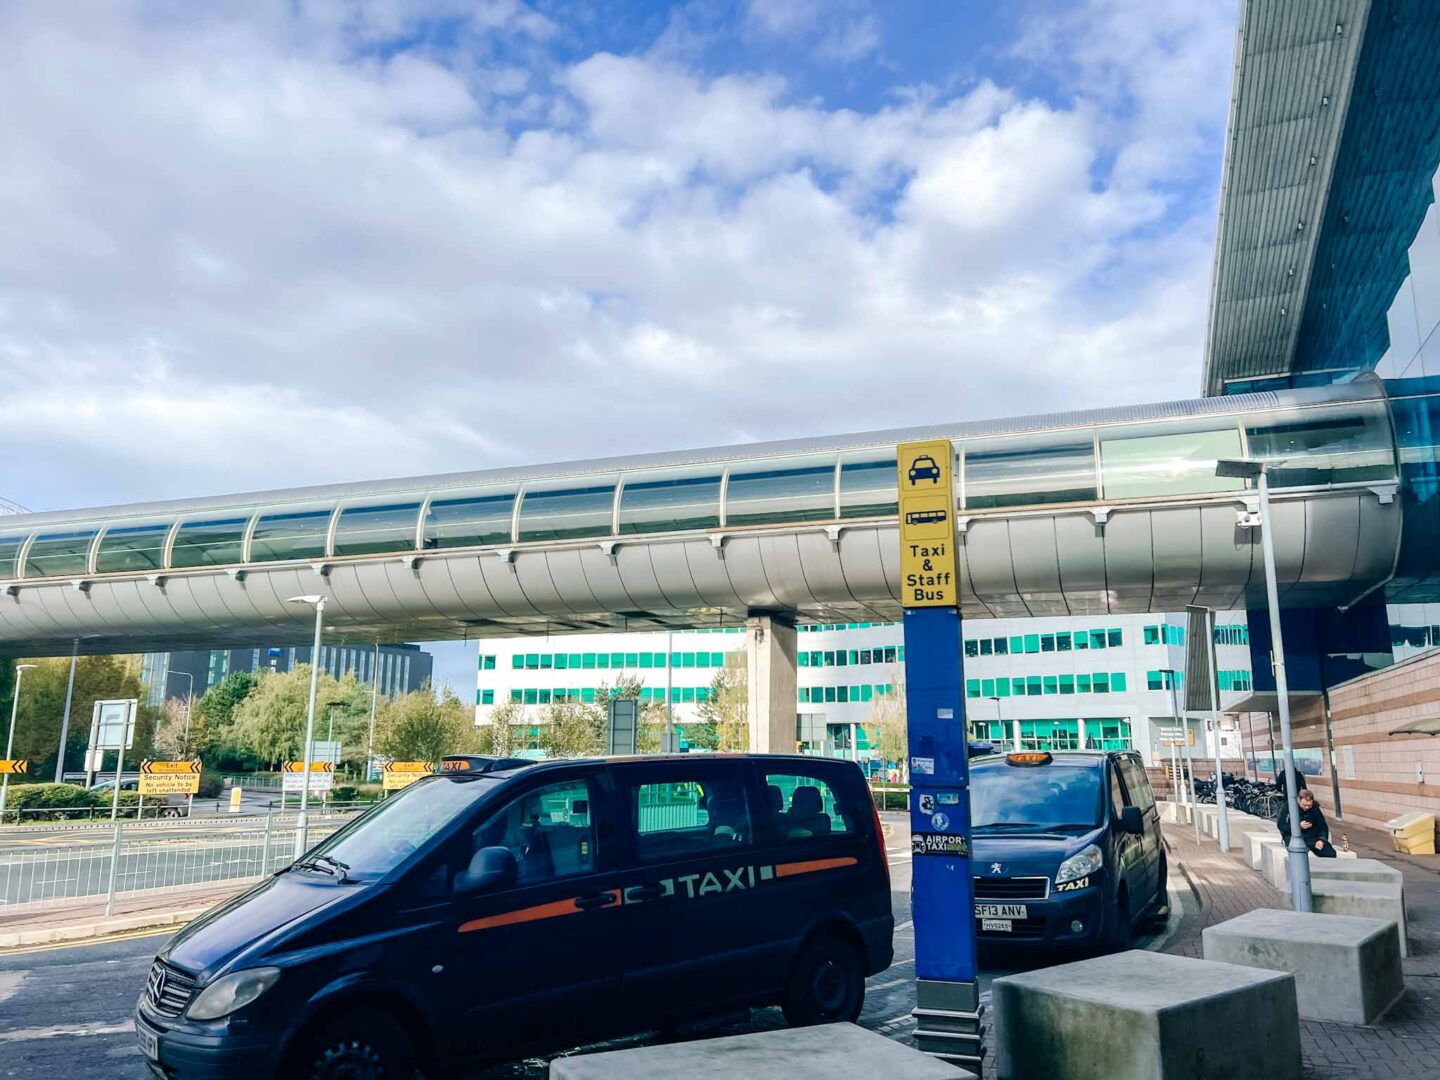 Things to do near Manchester Airport, taxis outside Manchester Airport